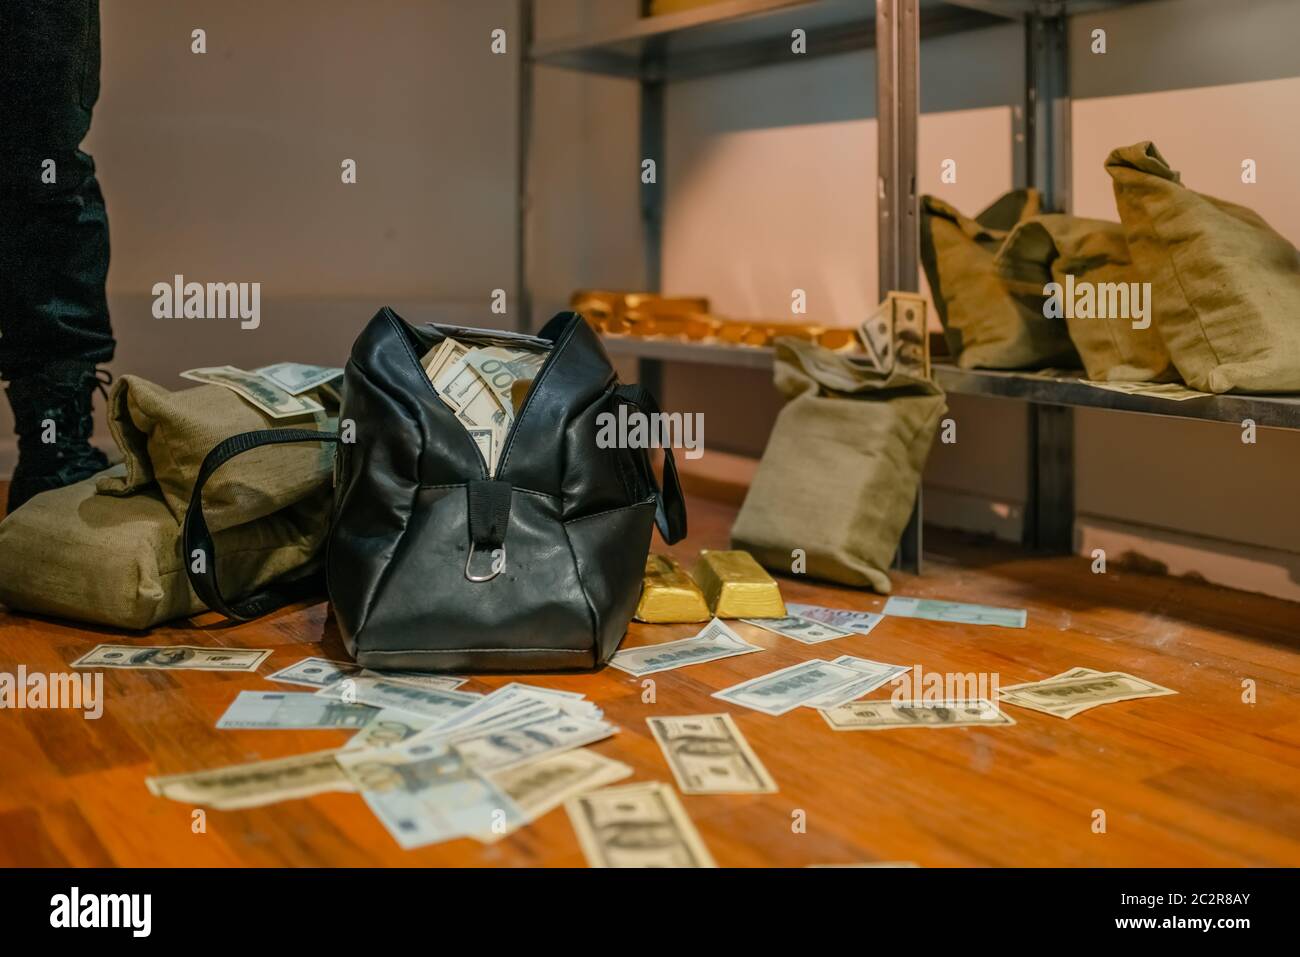 Bank robbery, bags full of money and gold, particular vault. Criminal profession, theft concept Stock Photo